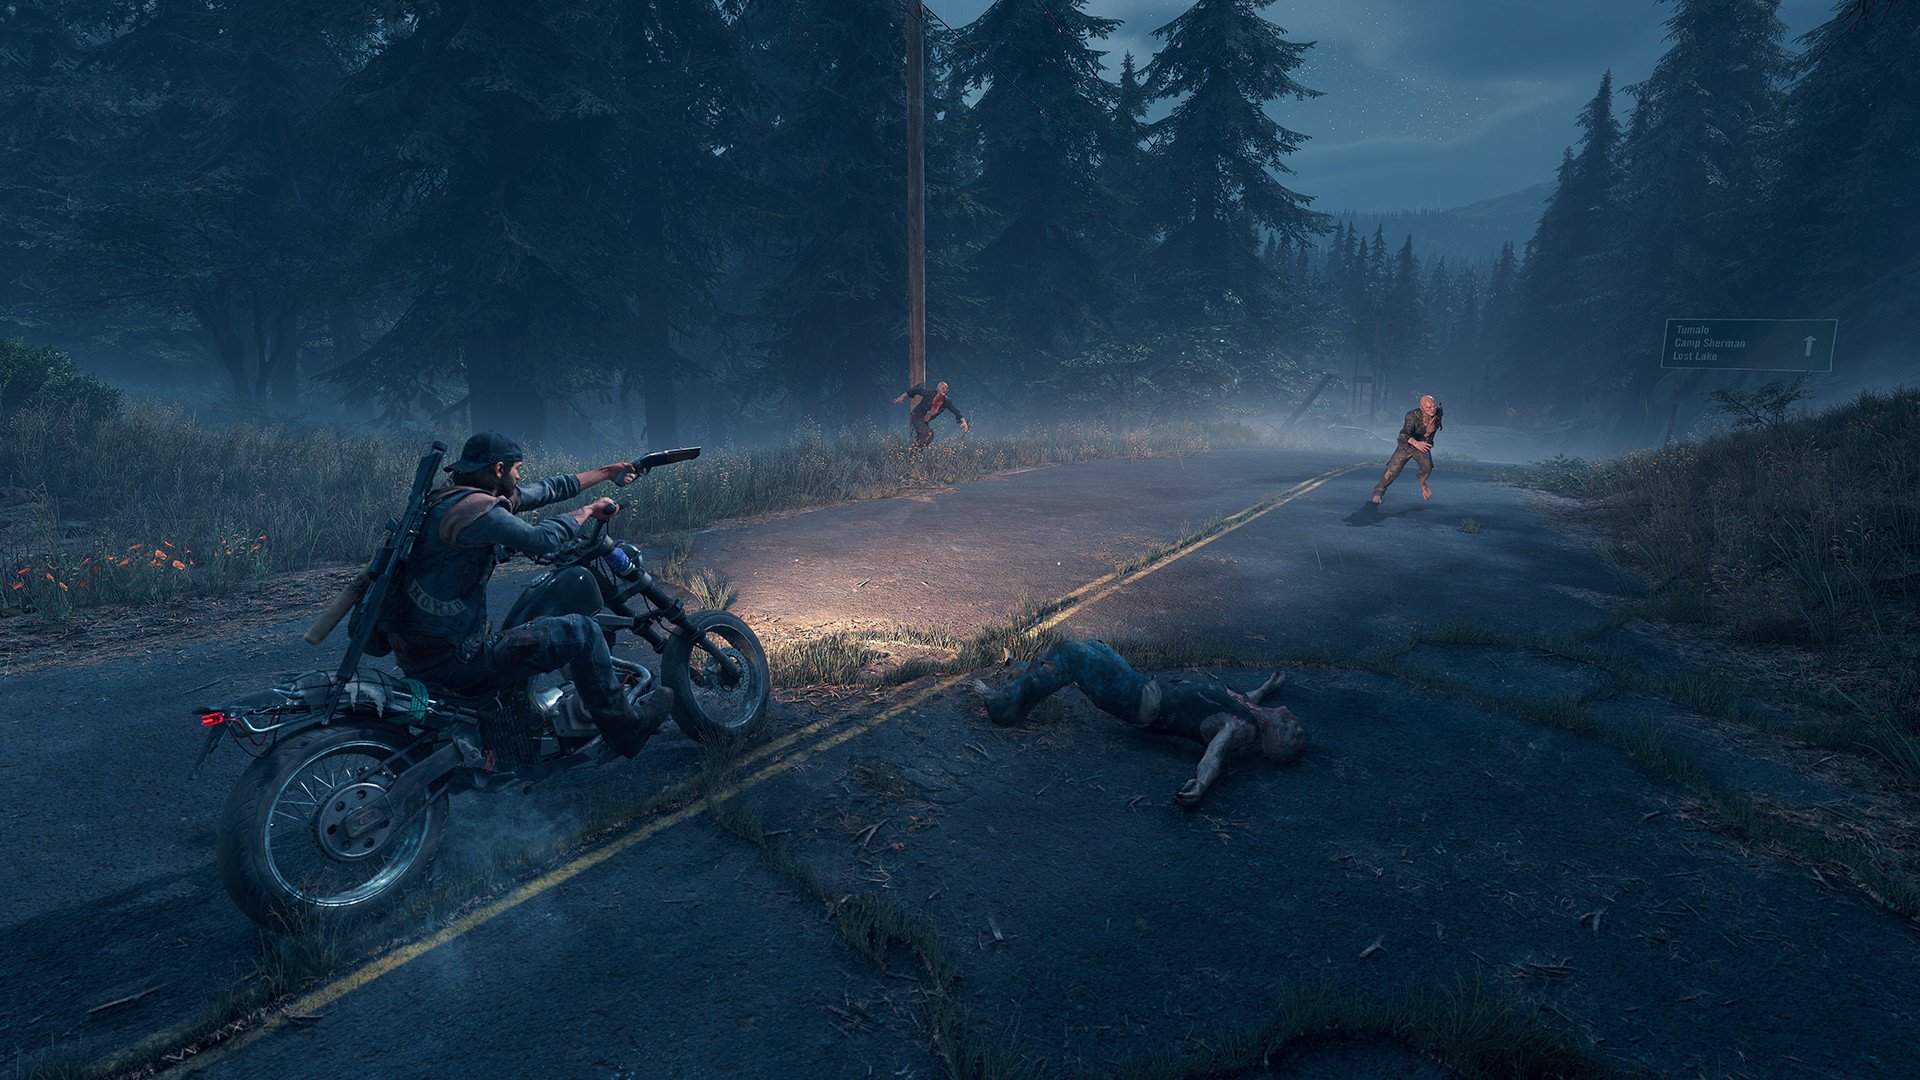 Days Gone 2 Online Mode Would Have Had “A Shared Universe With Co-op”